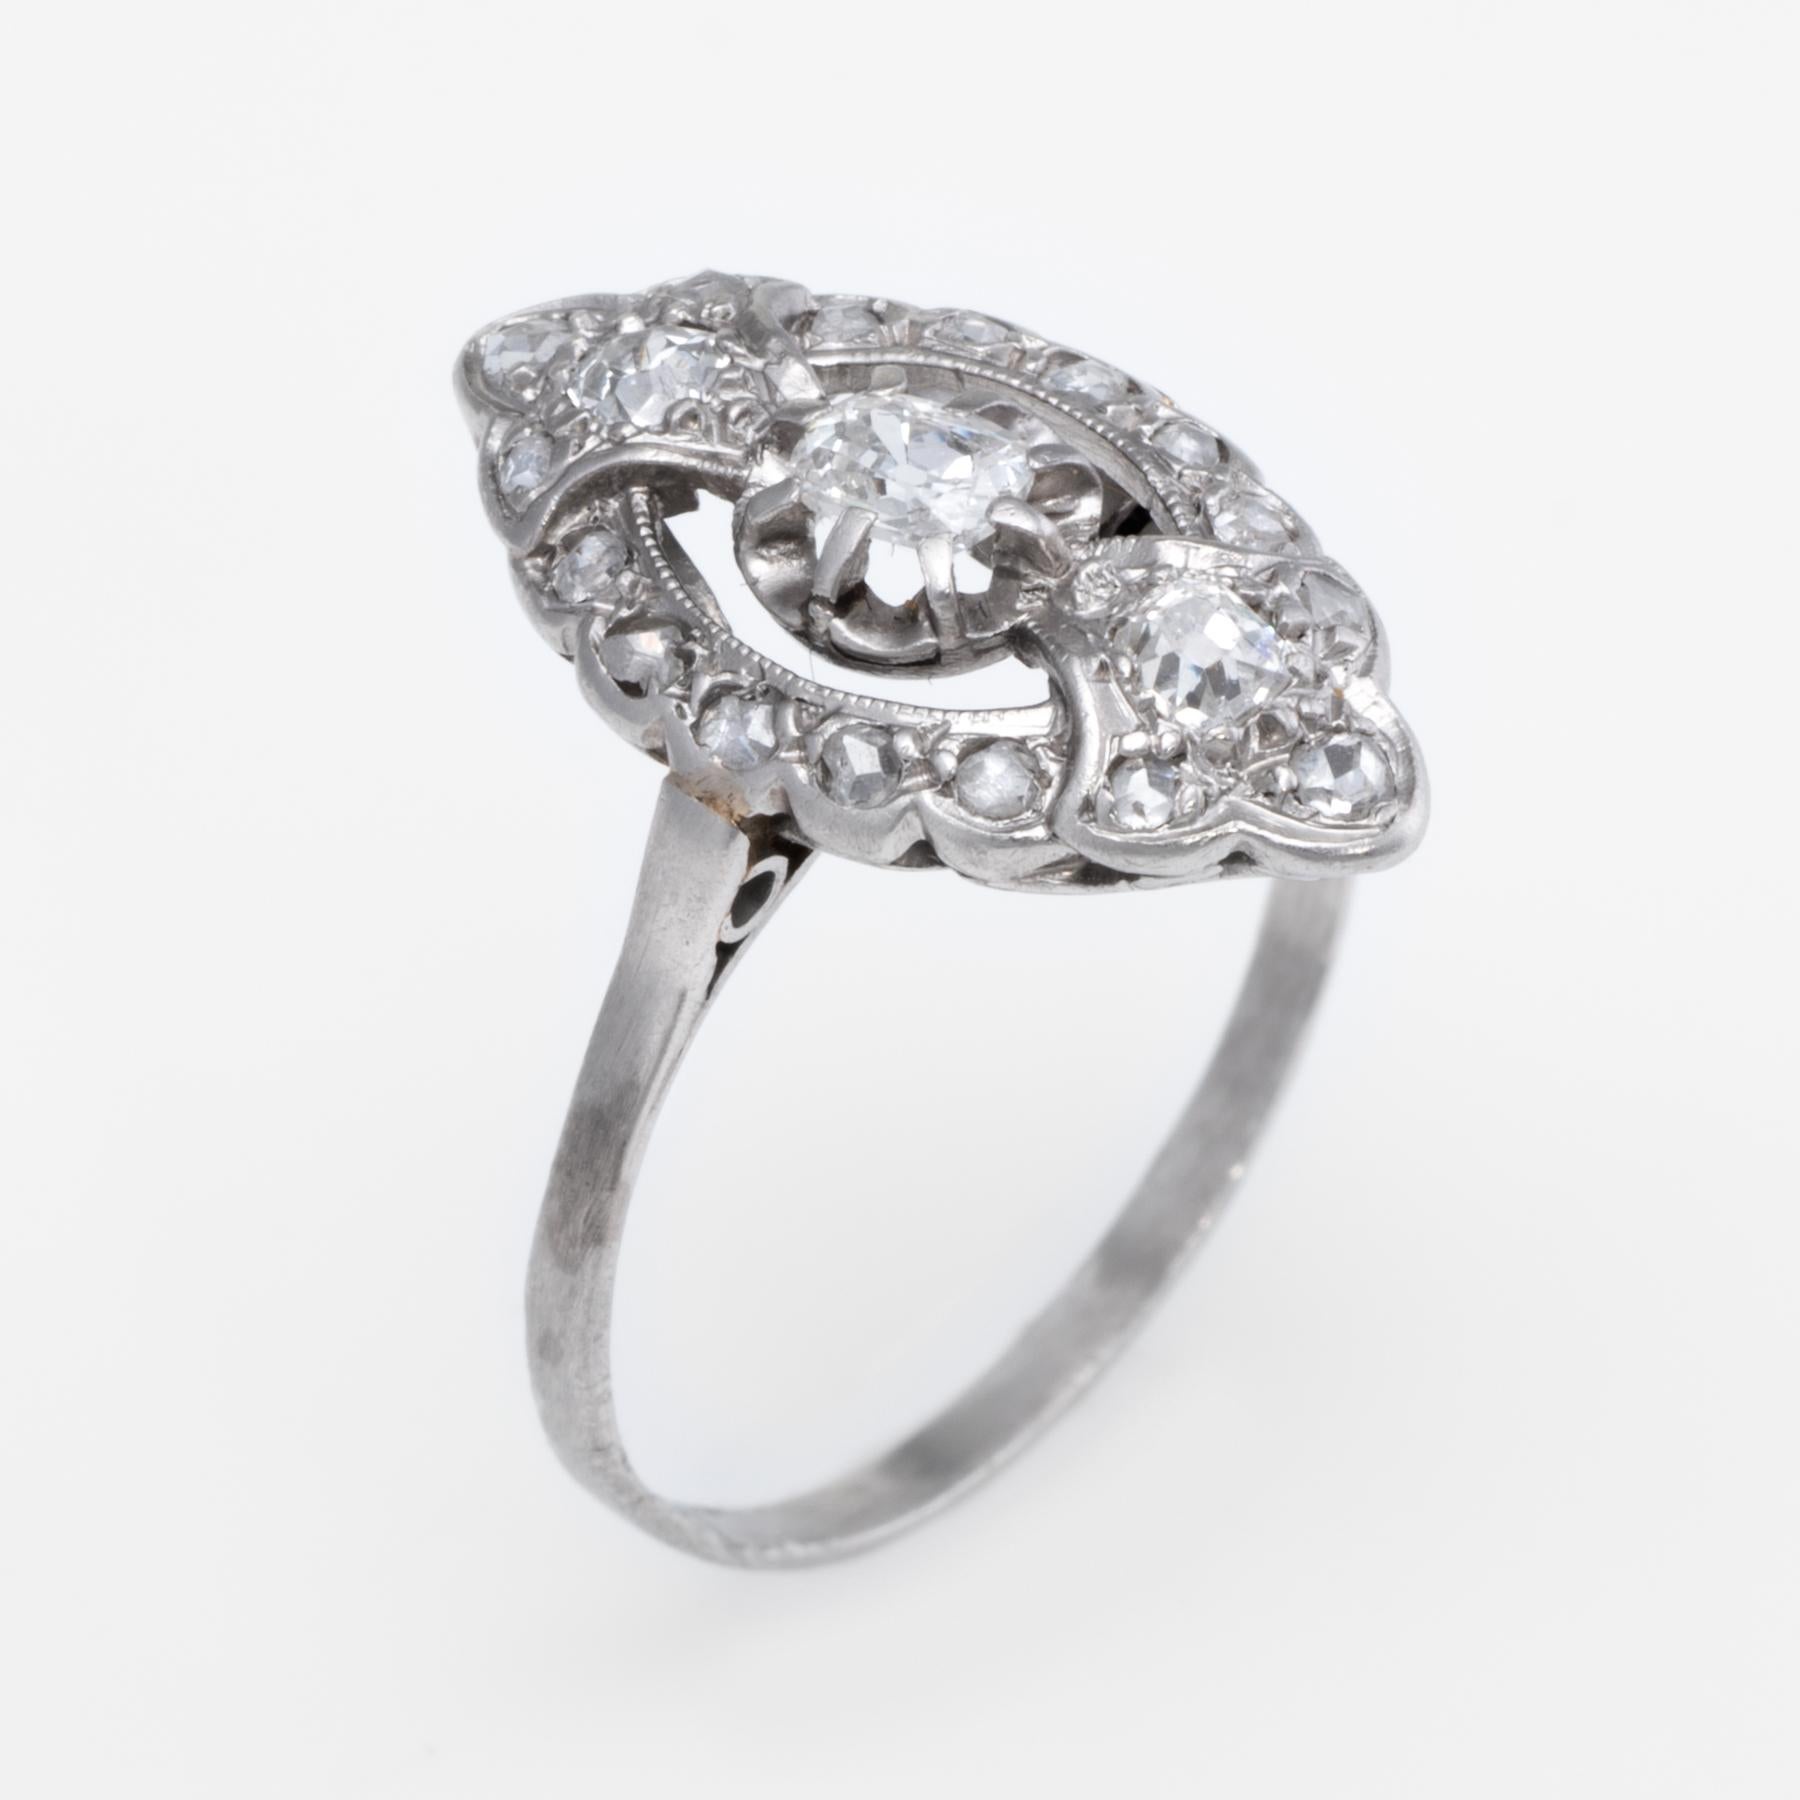 Finely detailed vintage Art Deco era ring (circa 1920s to 1930s), crafted in 900 platinum. 

Centrally mounted estimated 0.25 carat old cushion cut diamond is accented with two estimated 0.08 carat cushion cut diamonds (each) and a further 16